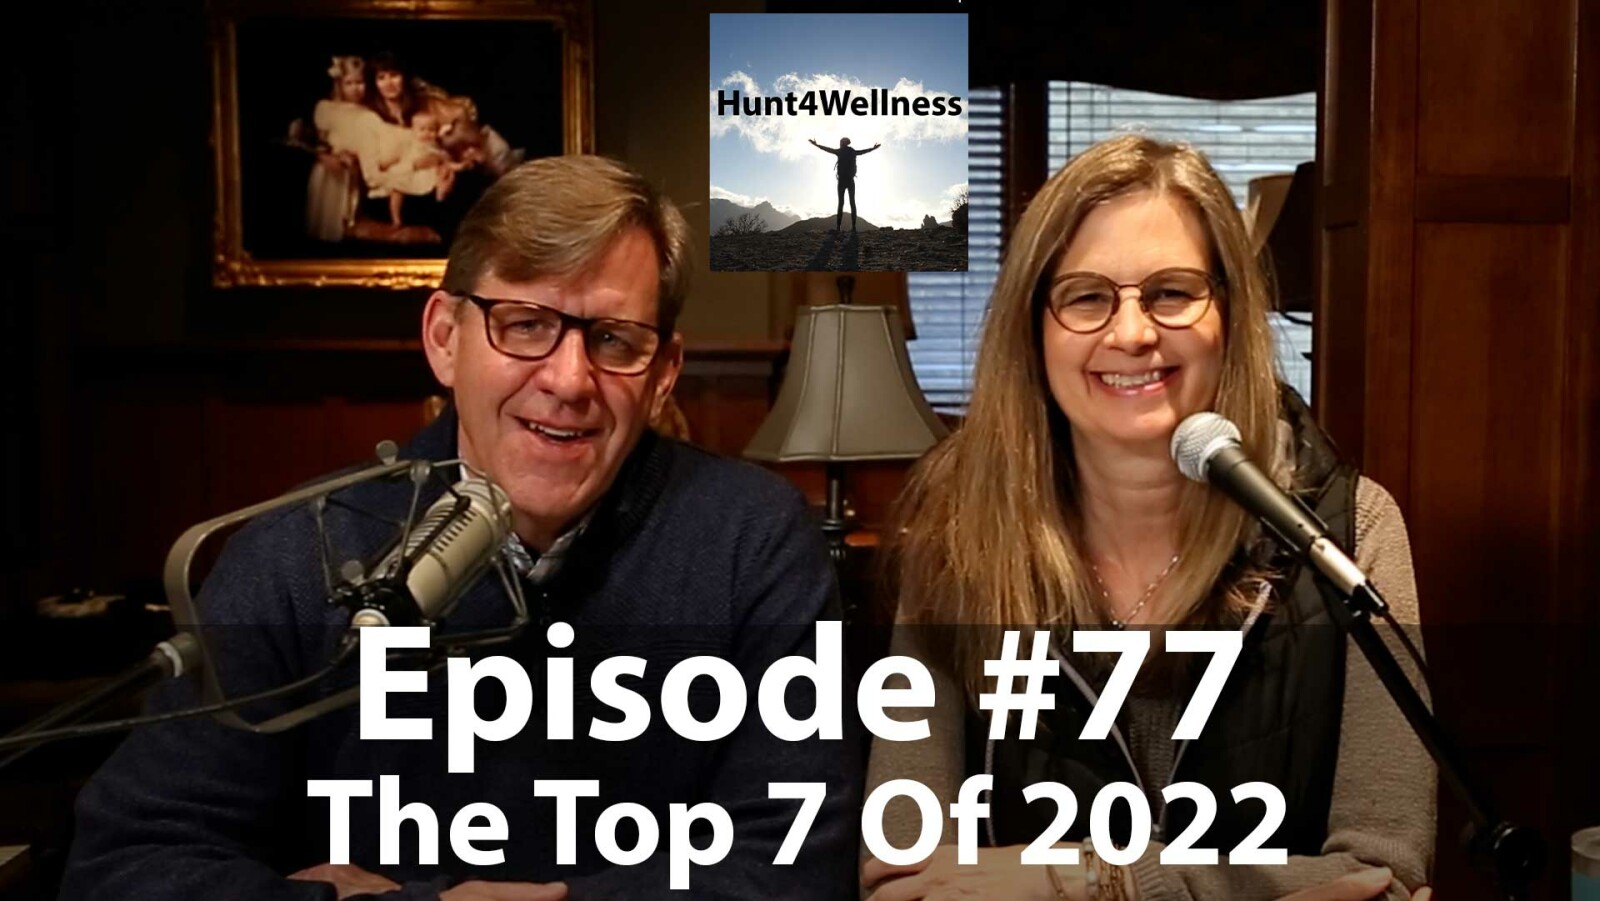 Episode #77 - The Top 7 Of 2022